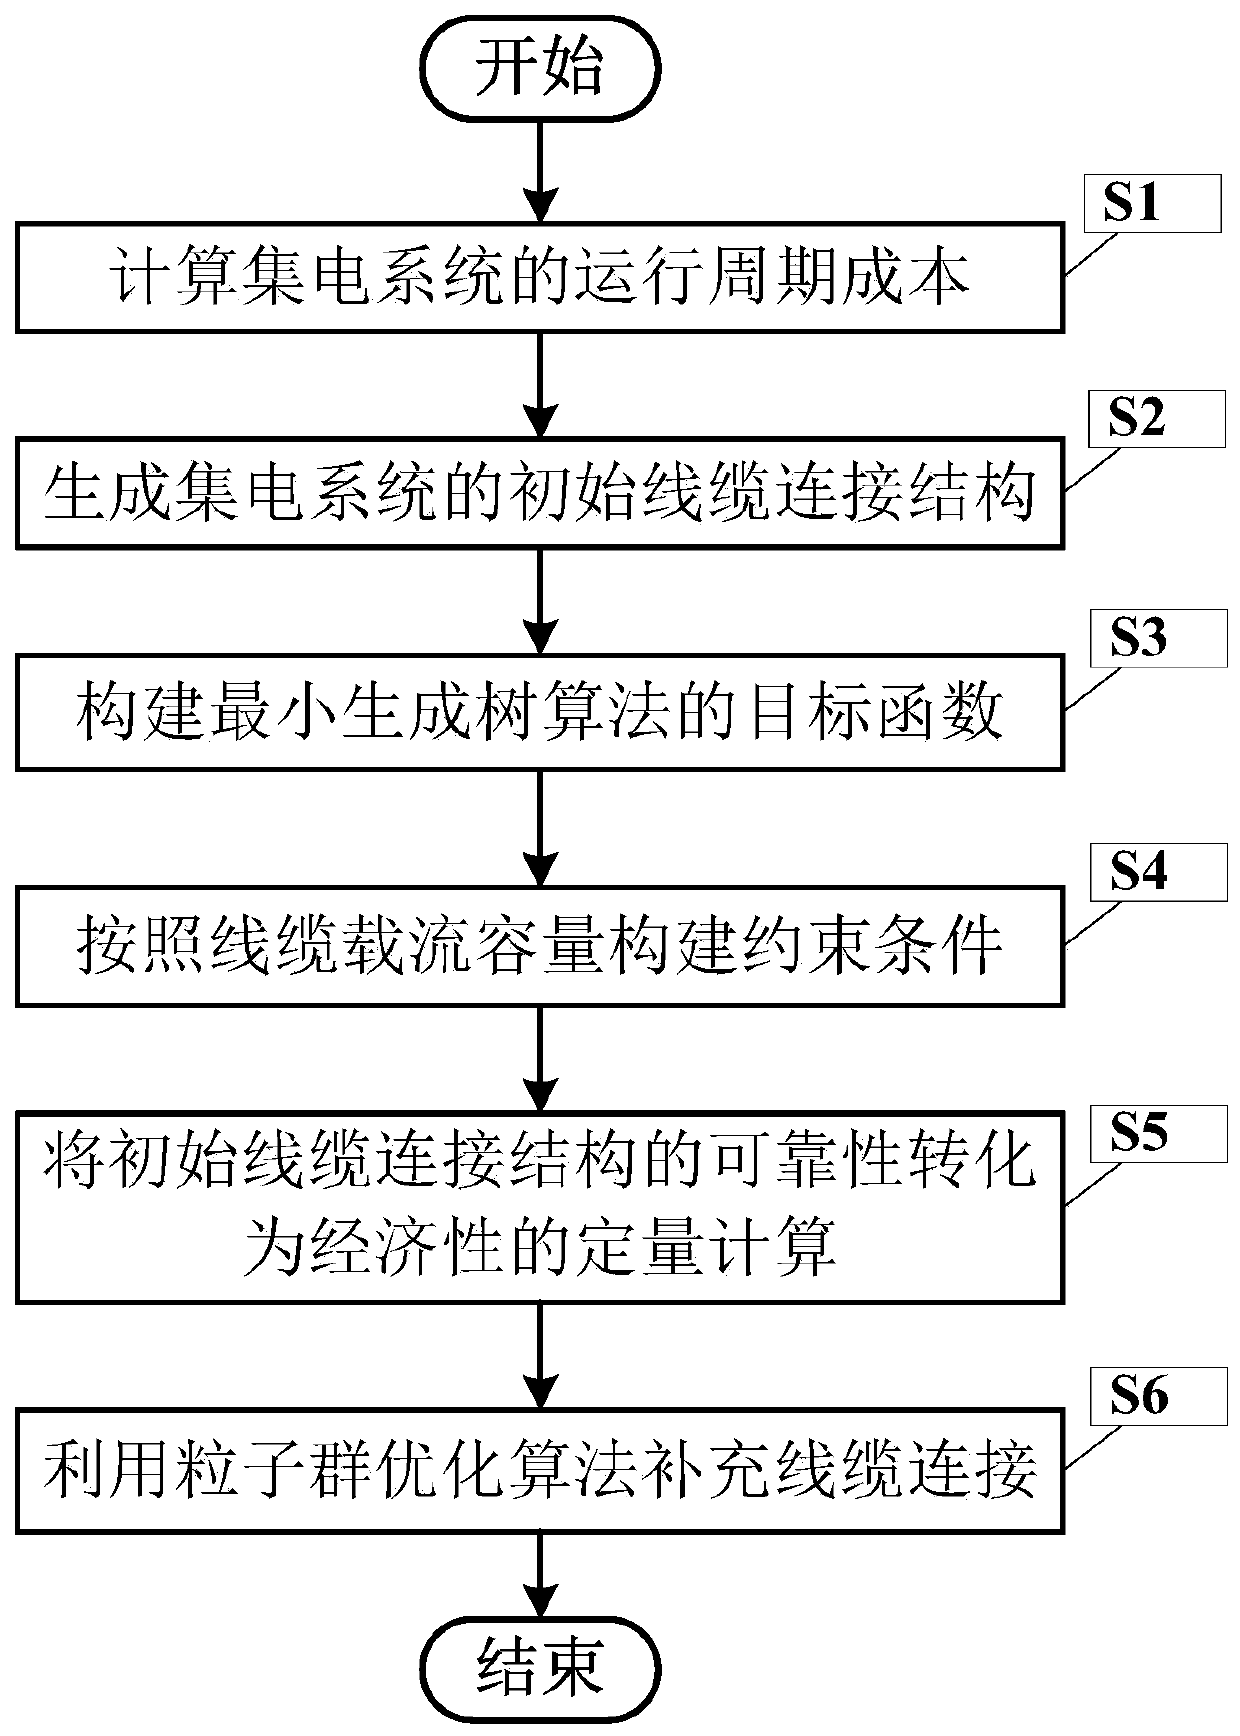 Hybrid cable connection method considering reliable wind power plant current collection system